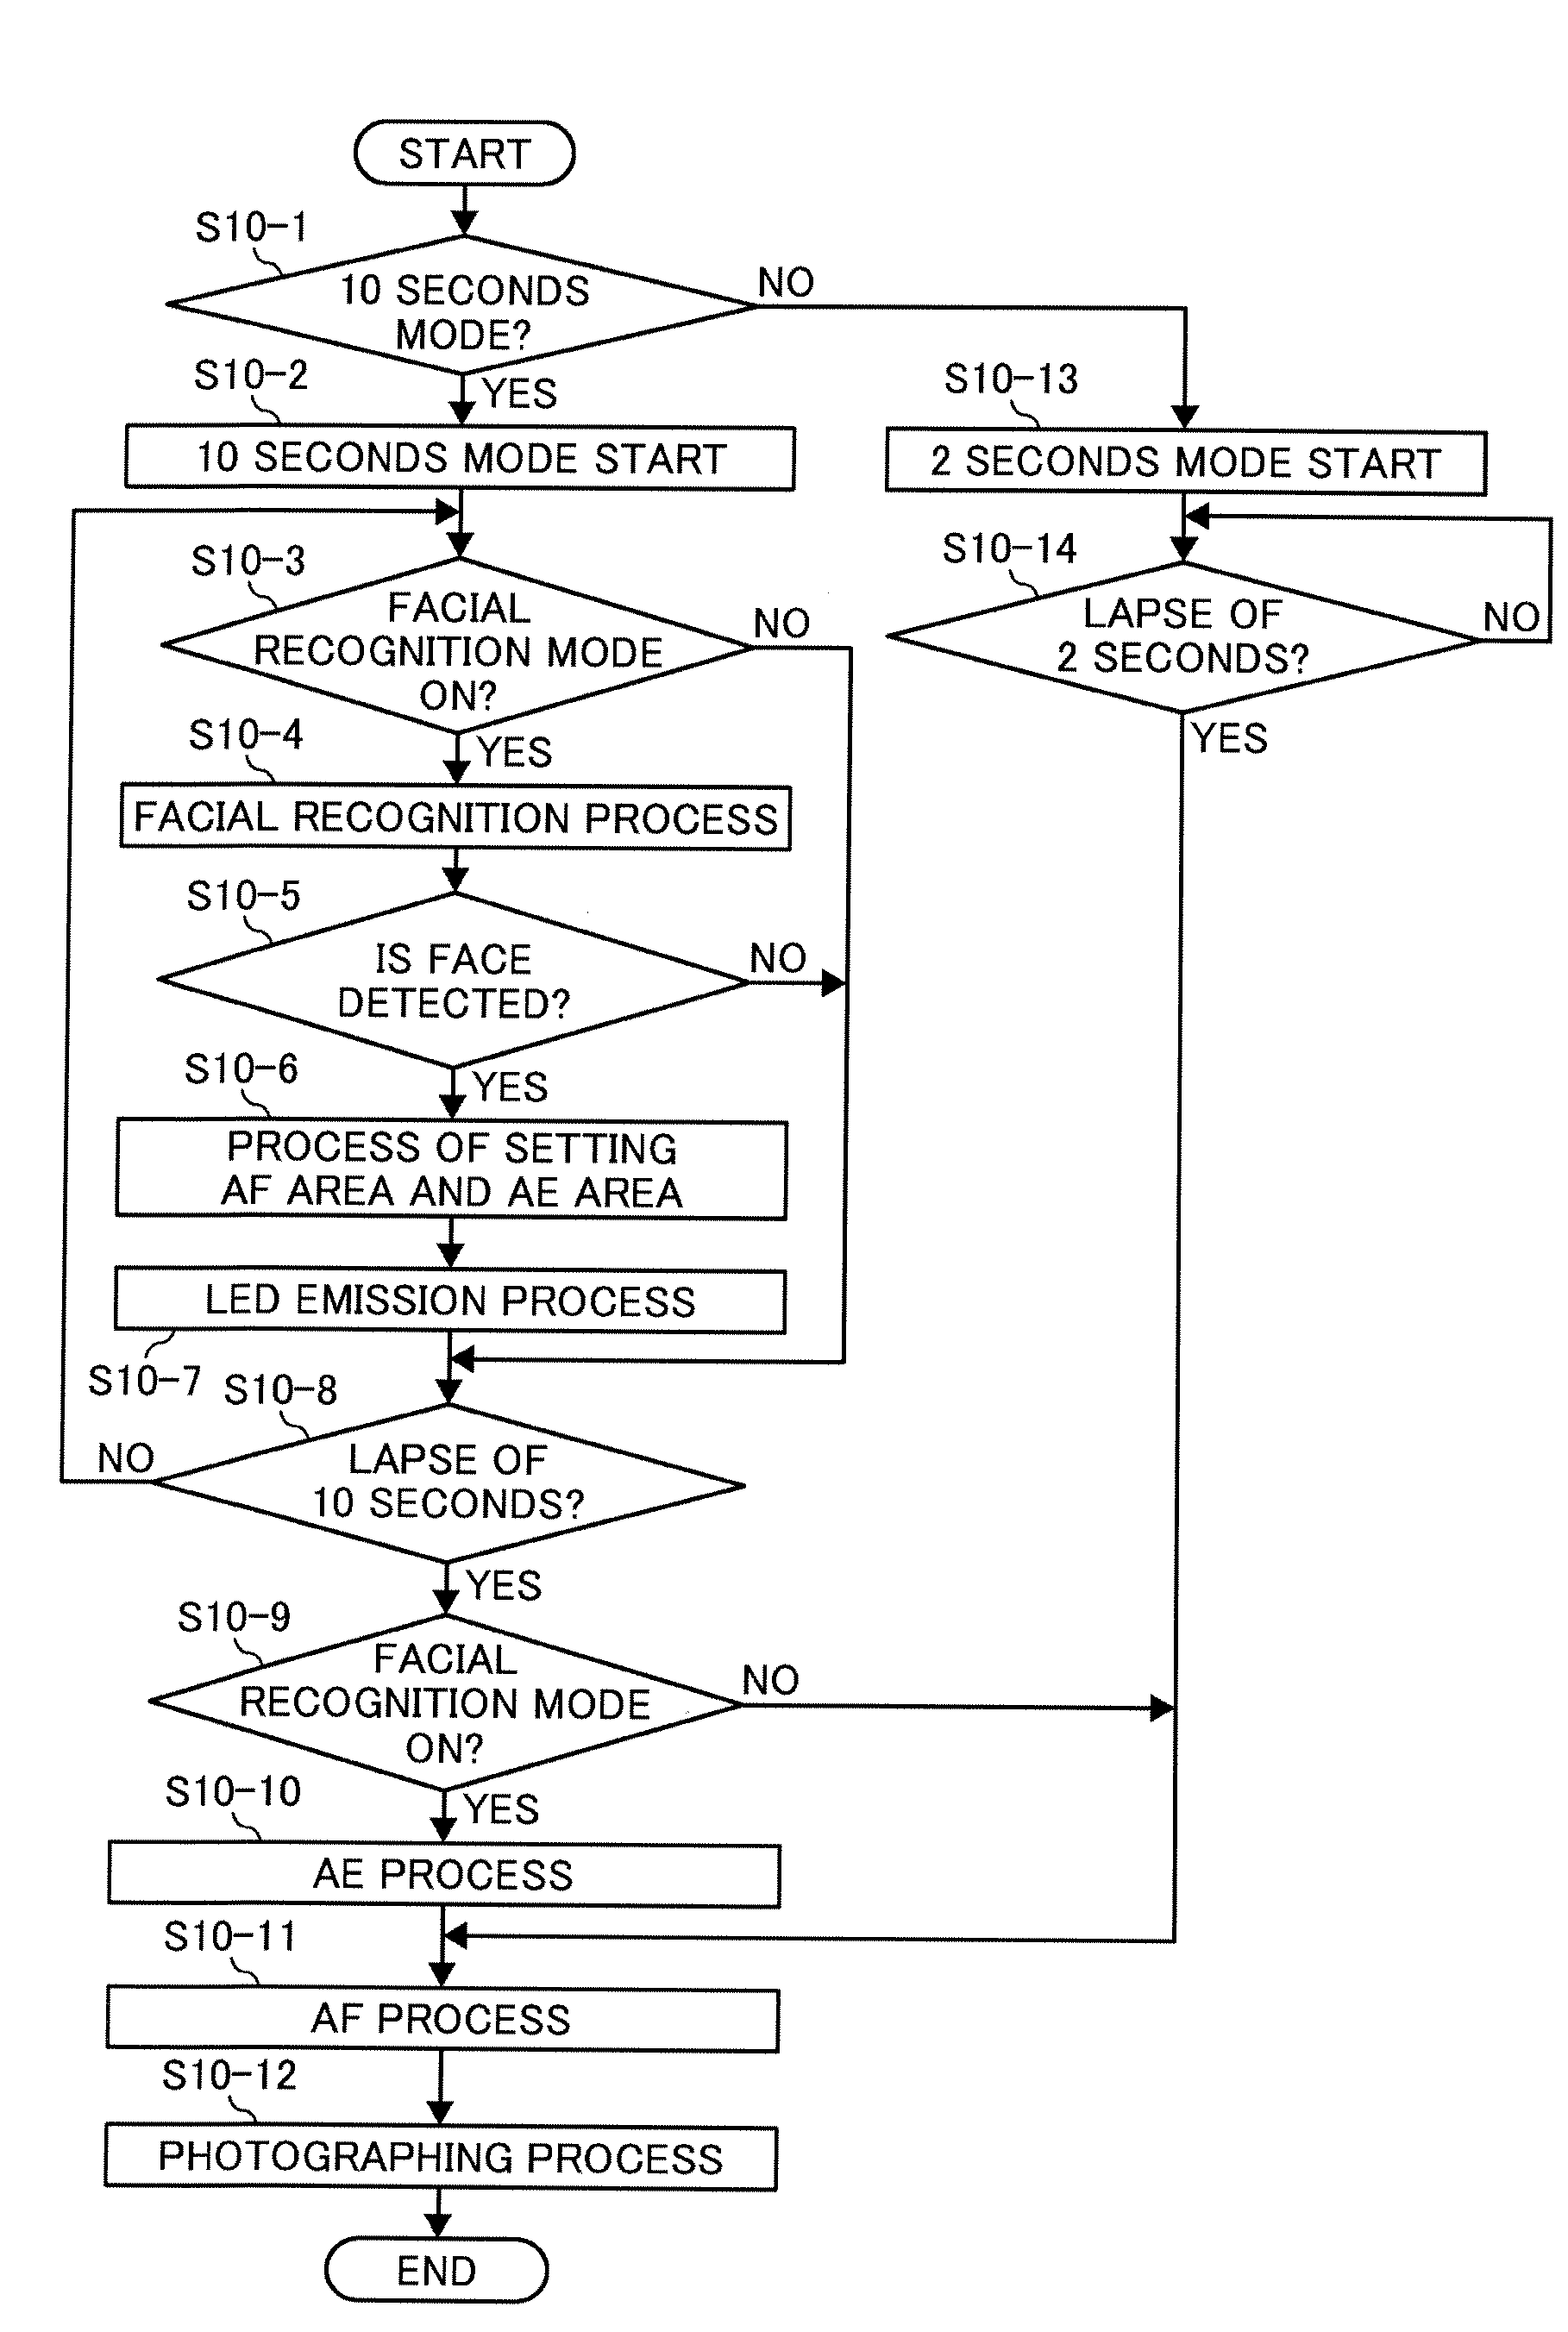 Imaging device and method which performs face recognition during a timer delay